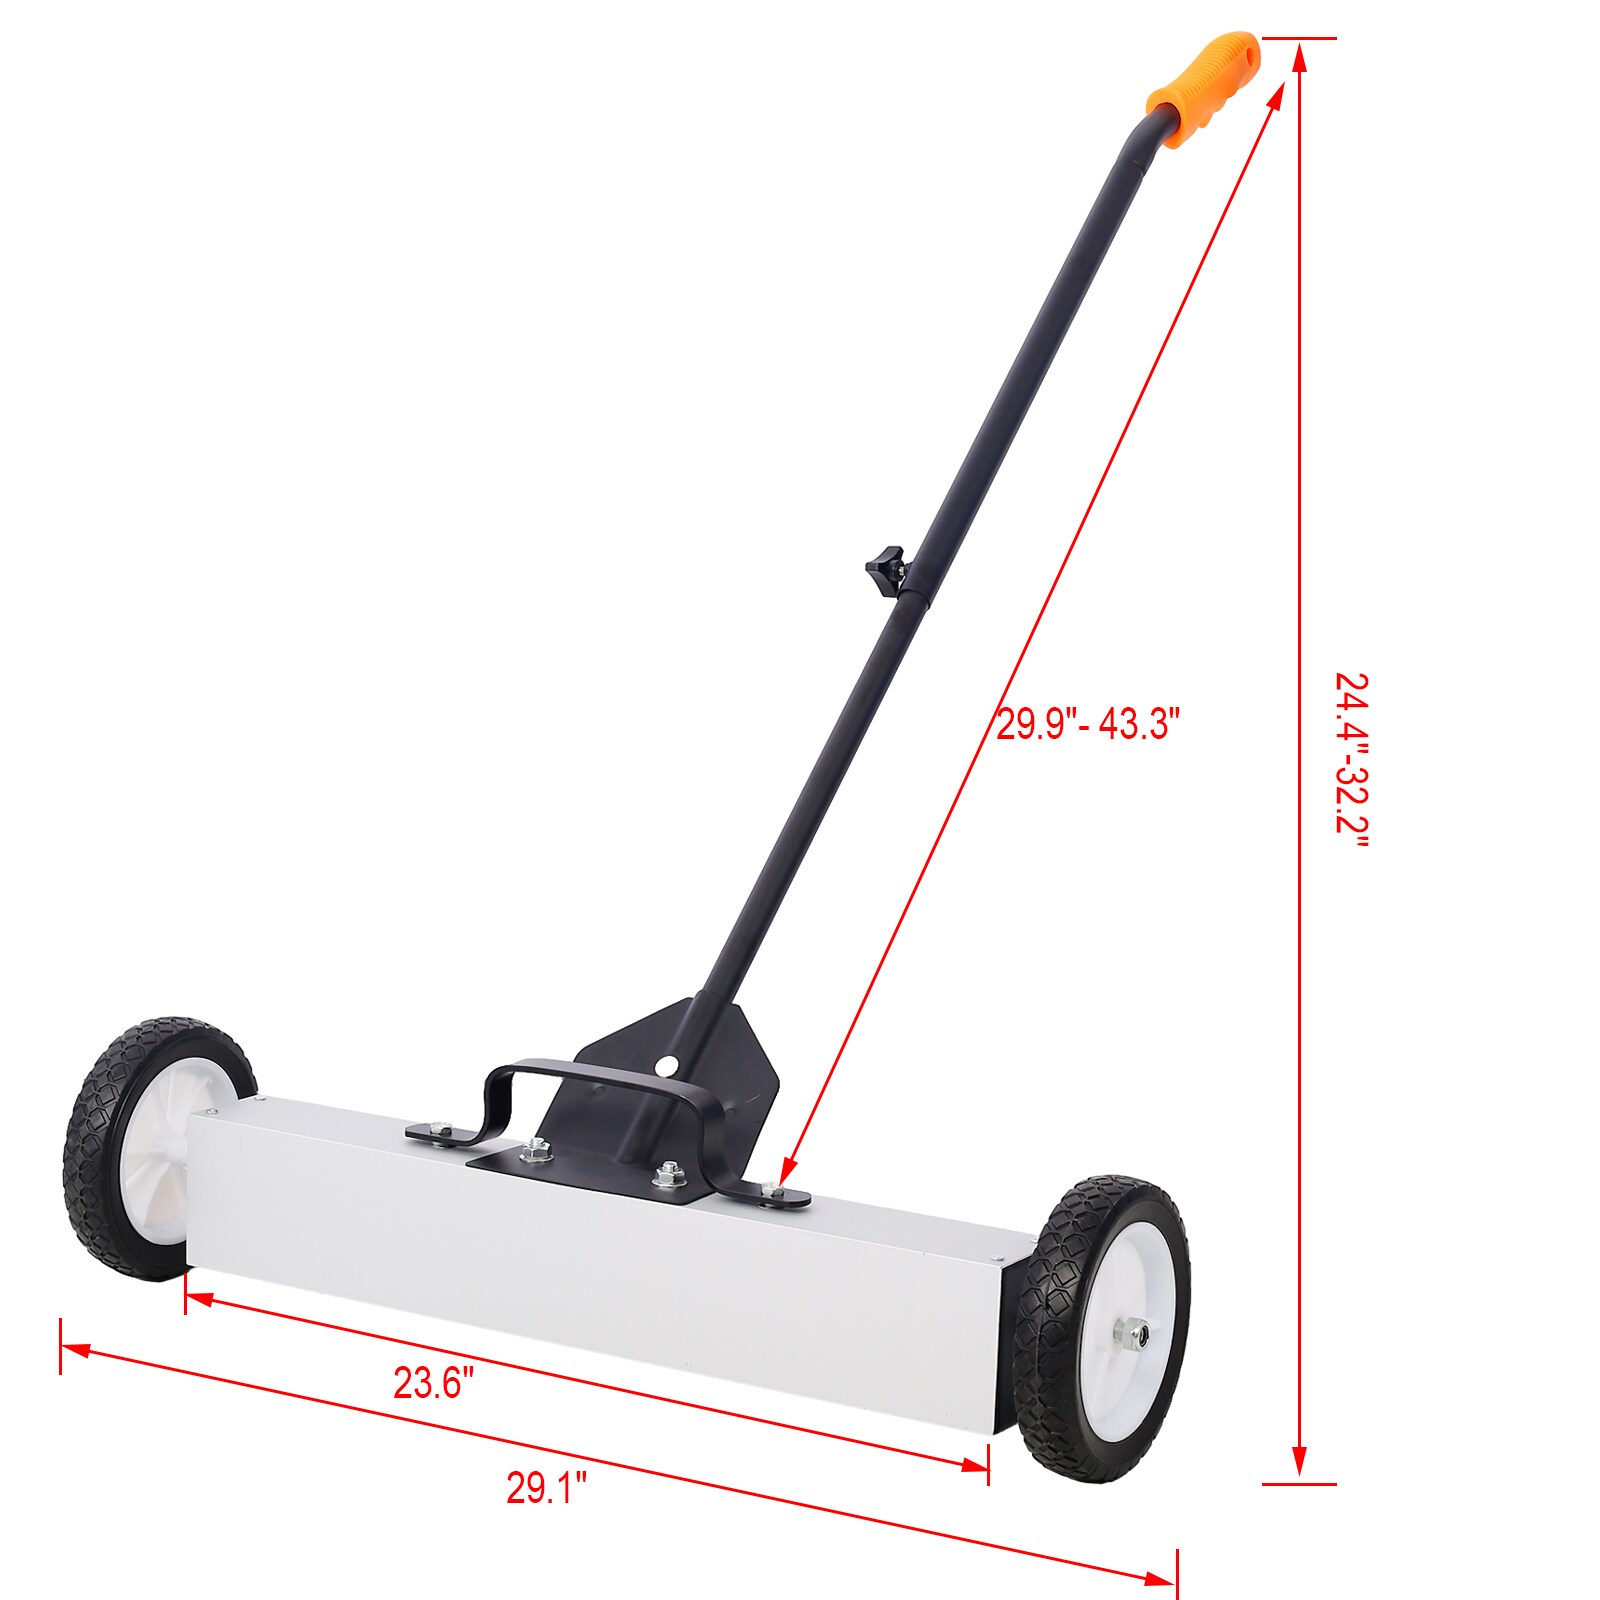 Maocao Hoom 24inch Rolling Magnetic Pick-up Sweeper, Heavy Duty Push-type  with Release, For Nails Needles Screws Collection in the Magnetic Tools  department at Lowes.com